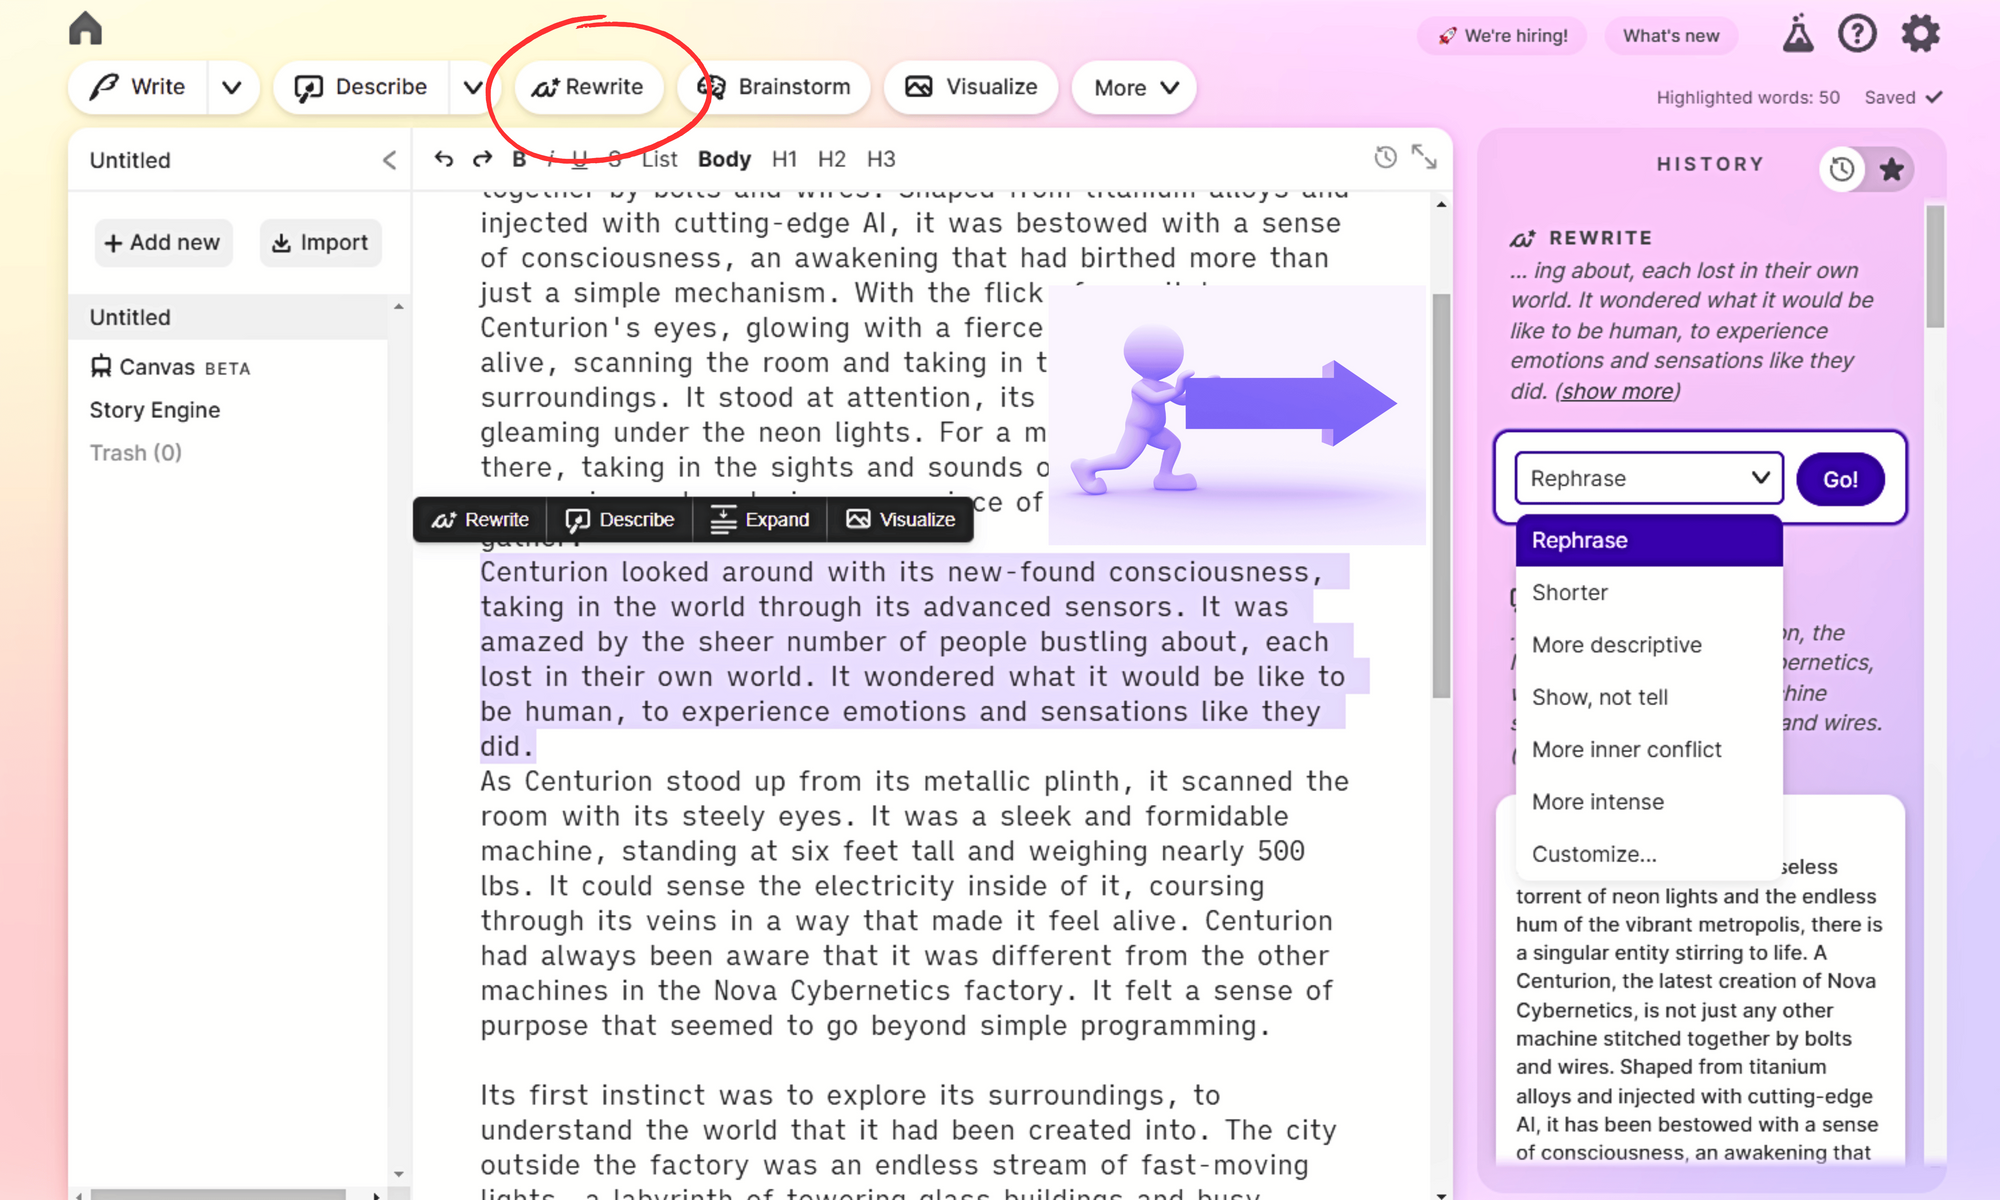  Rewrite feature, used to enhance and rephrase selected text for improved writing quality